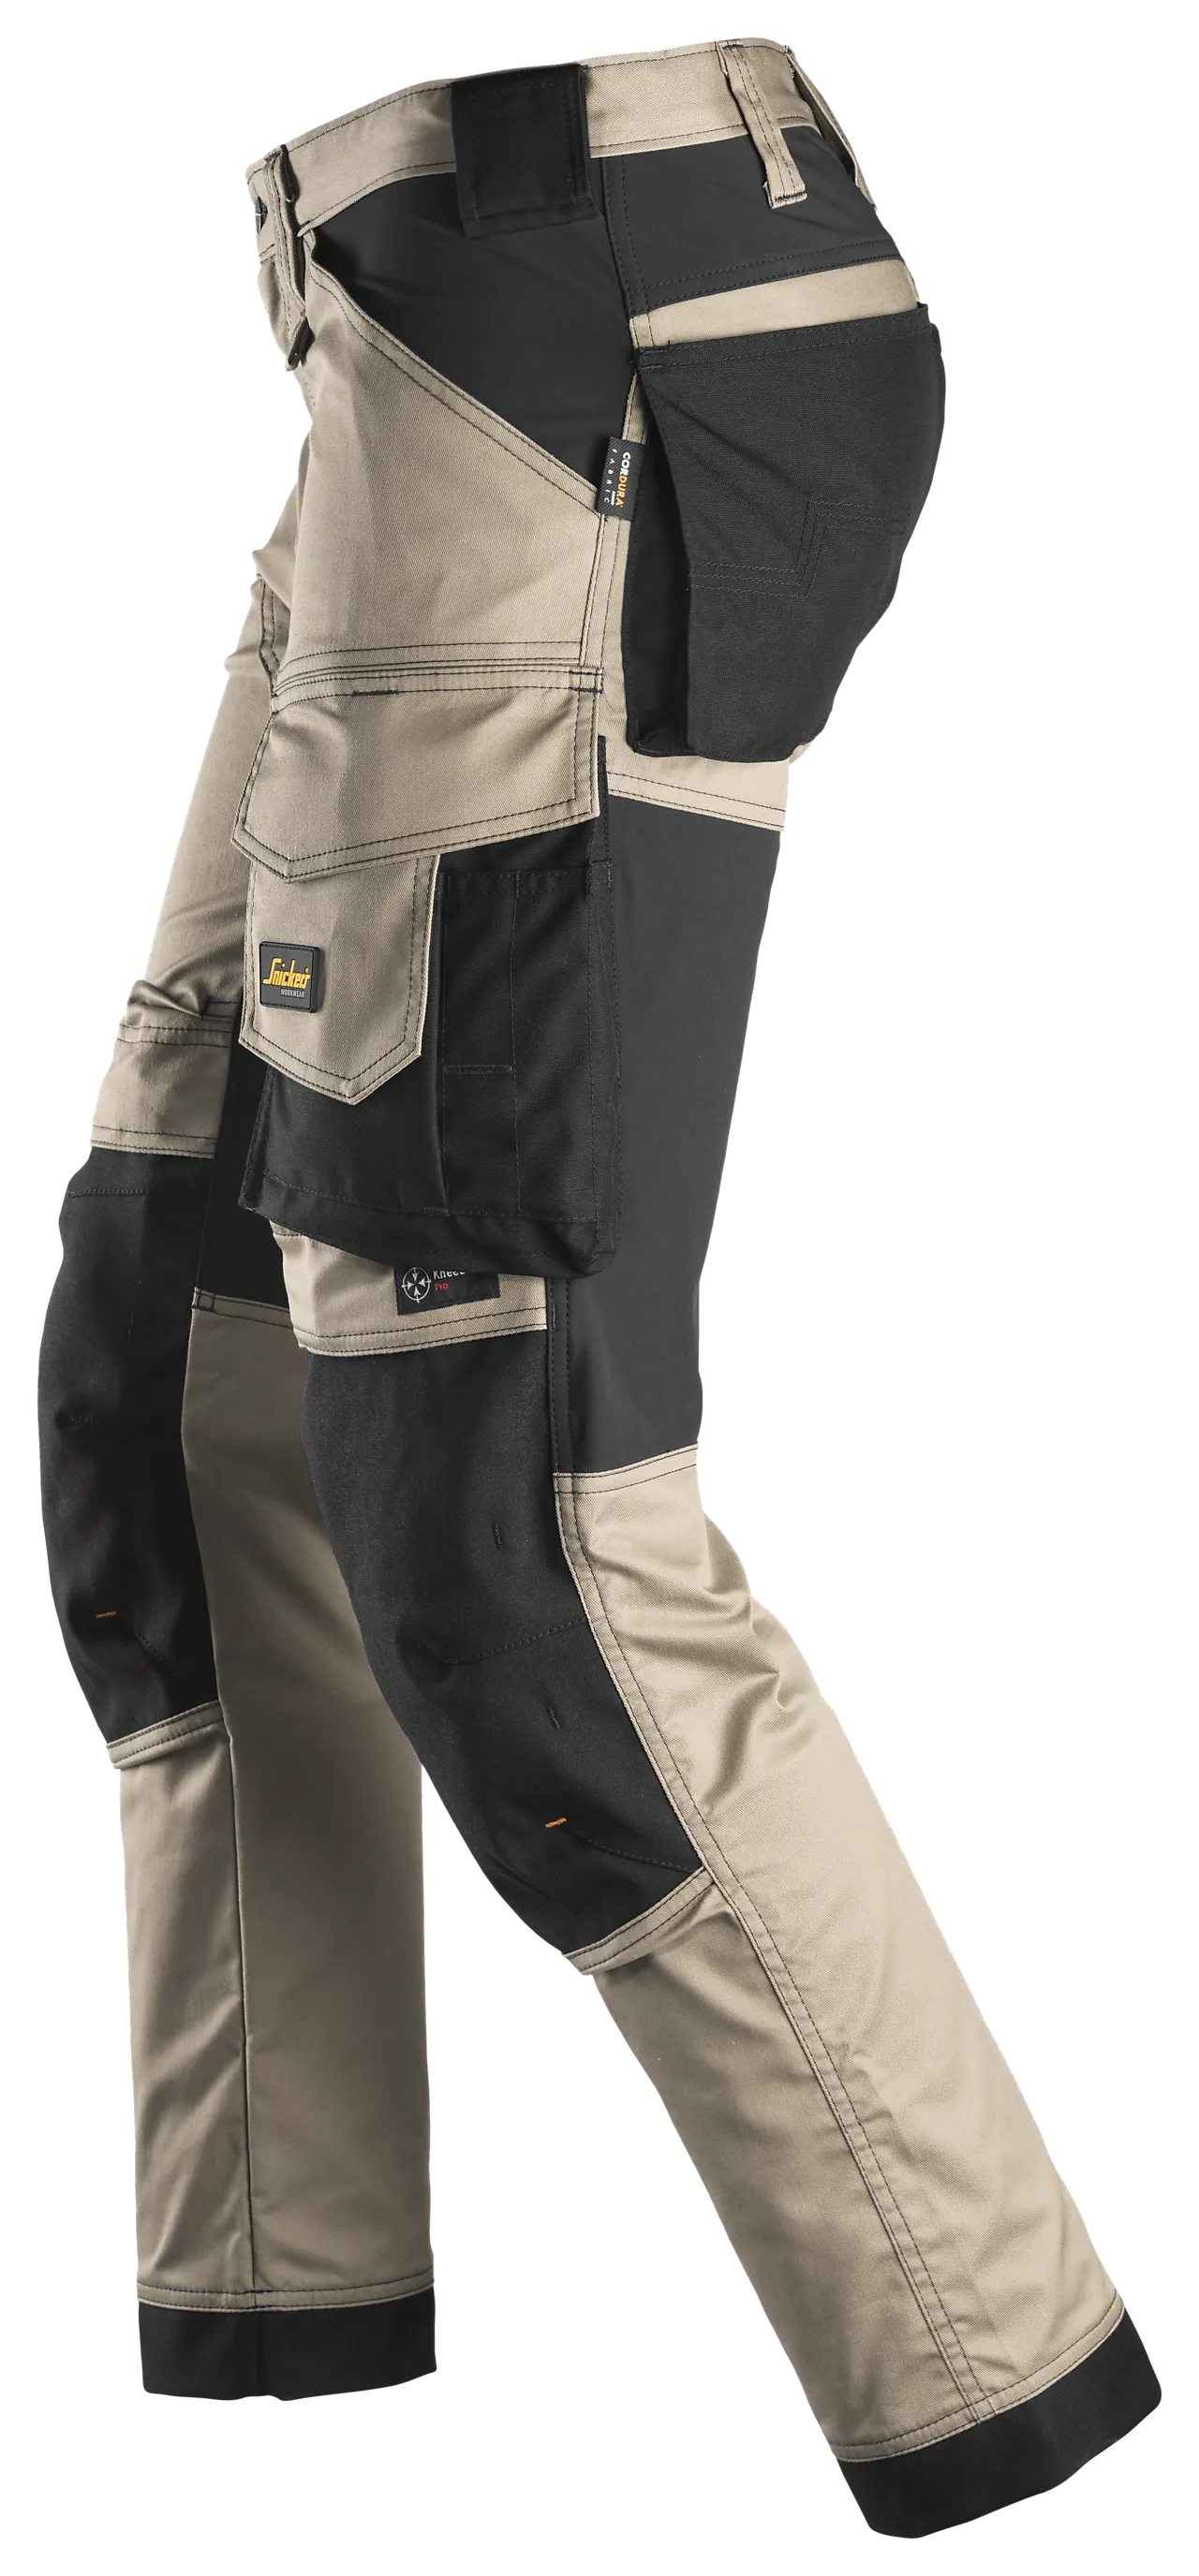 Bukse 6341 stretch 104 snickers workwear null - null - 2 - Miniatyr